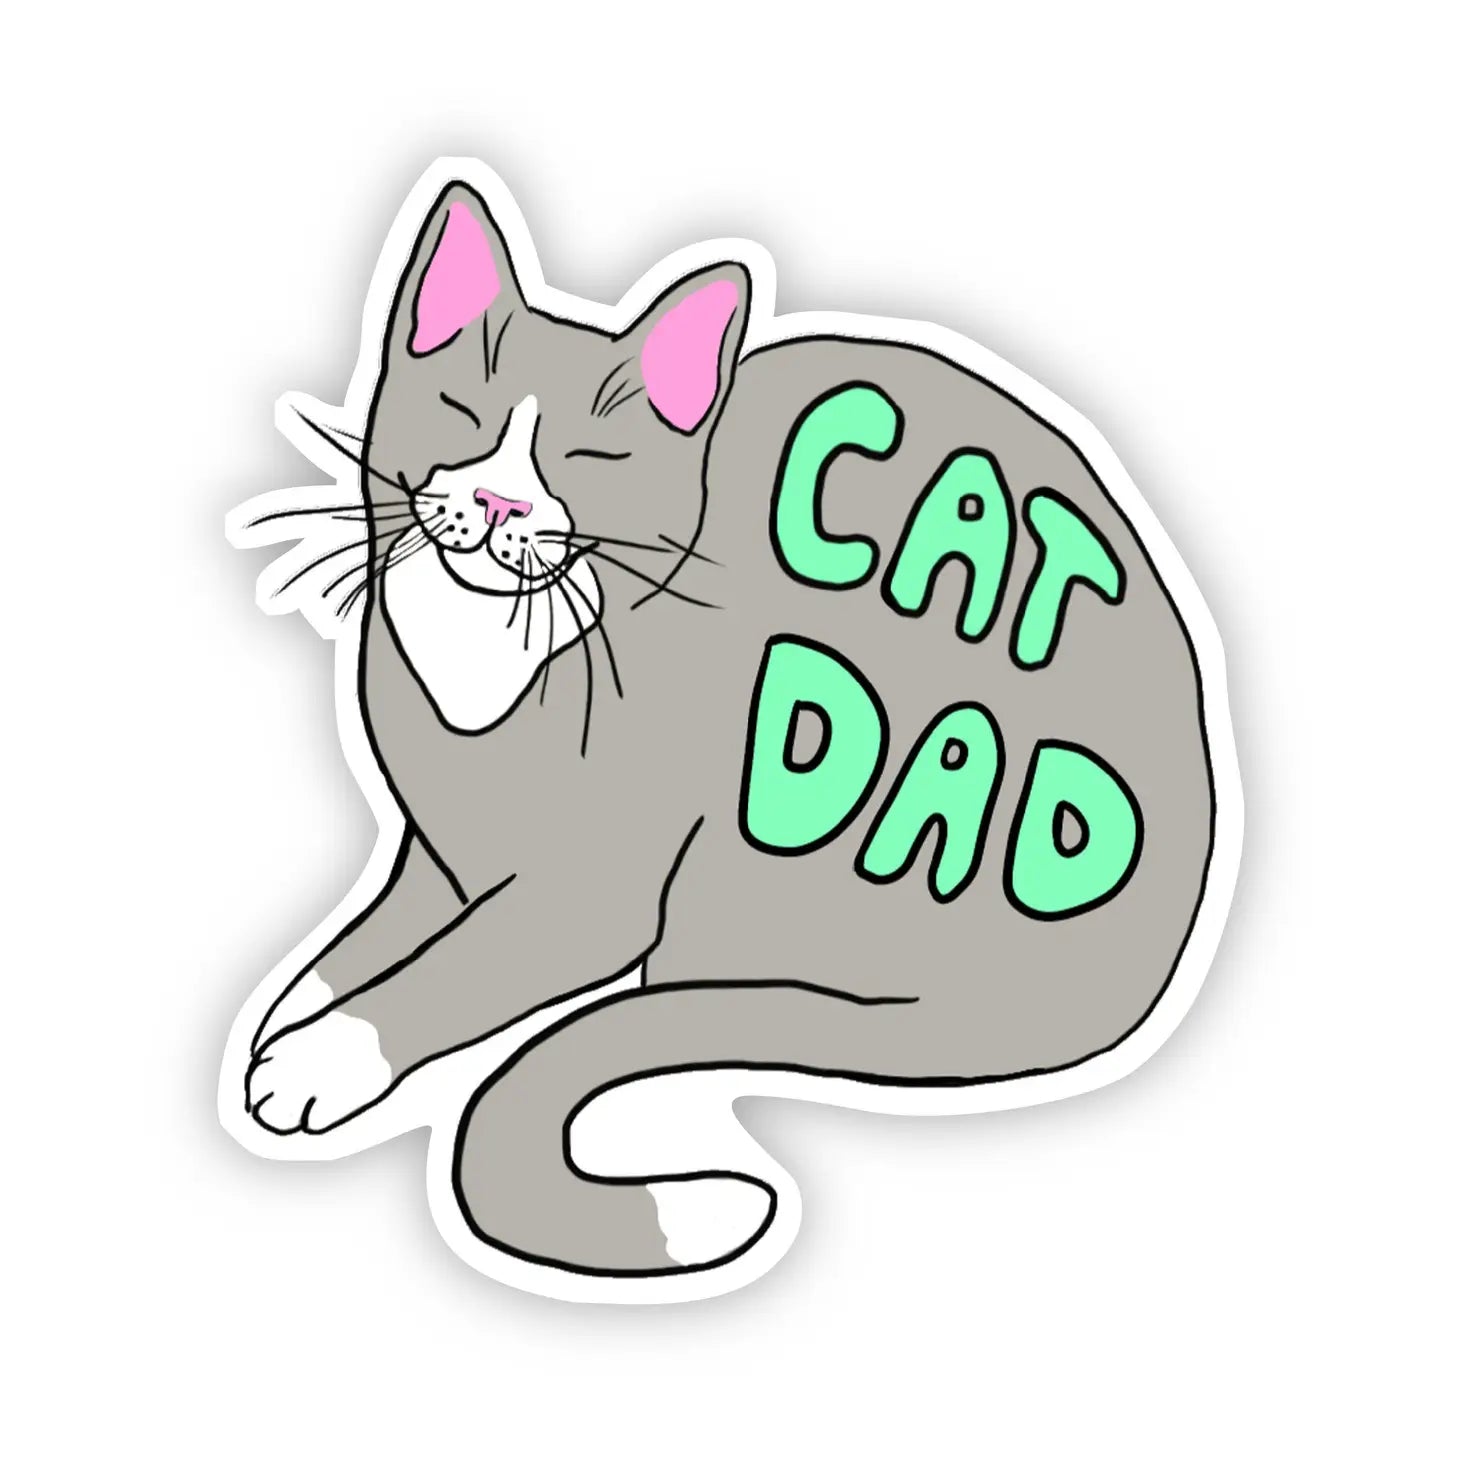 Cat Dad Sticker - Moon Room Shop and Wellness